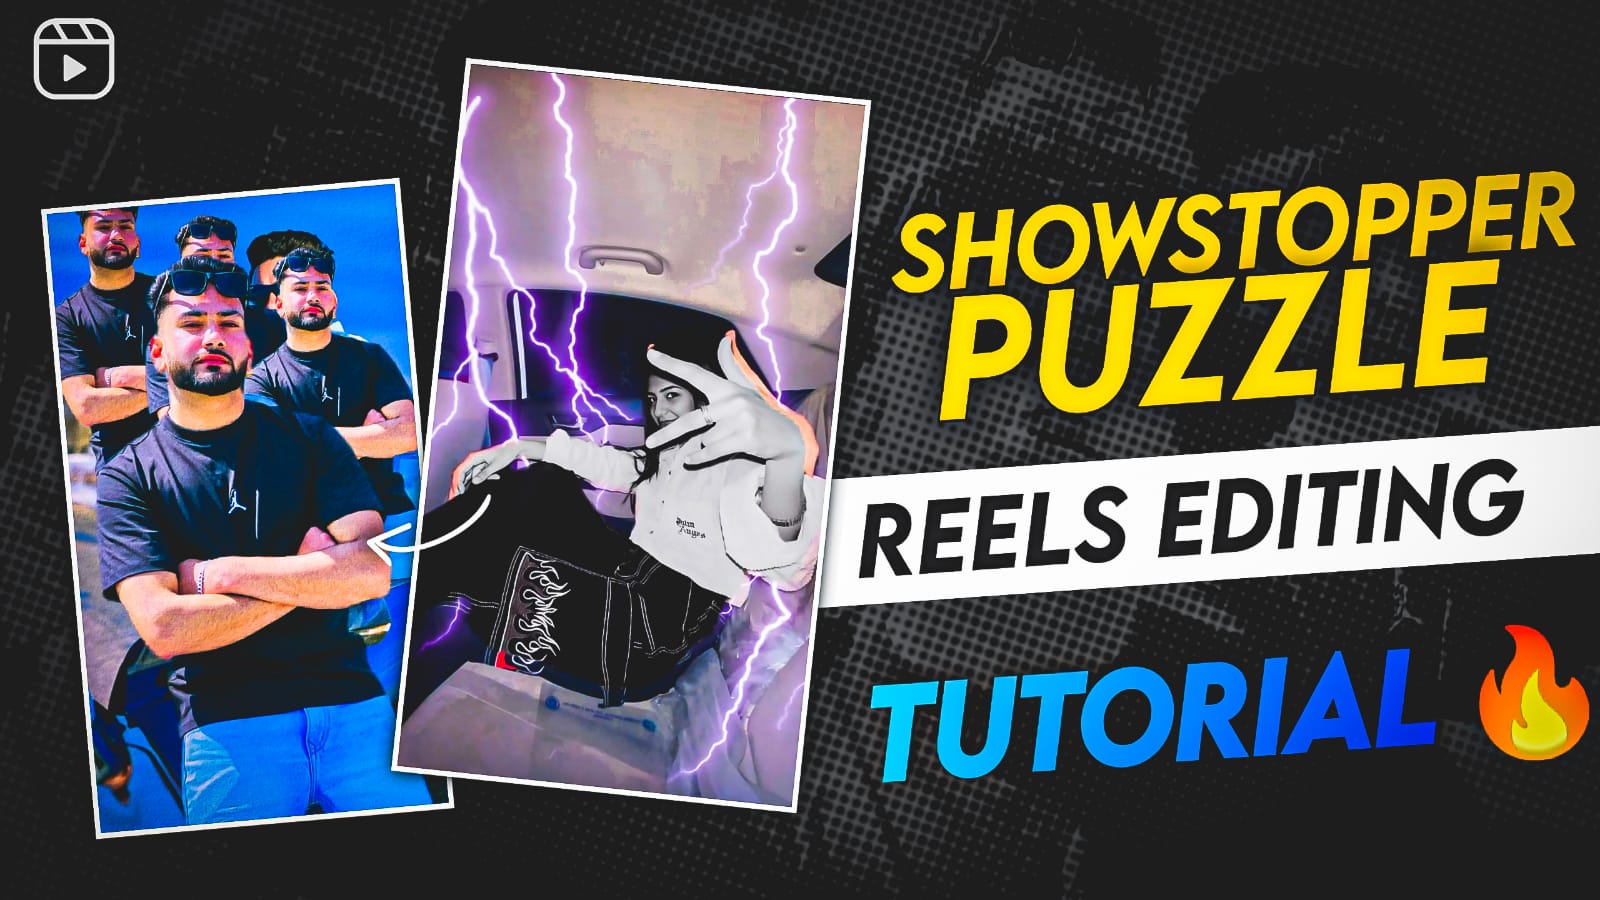 Showstopper' Puzzle Reels Video Editing